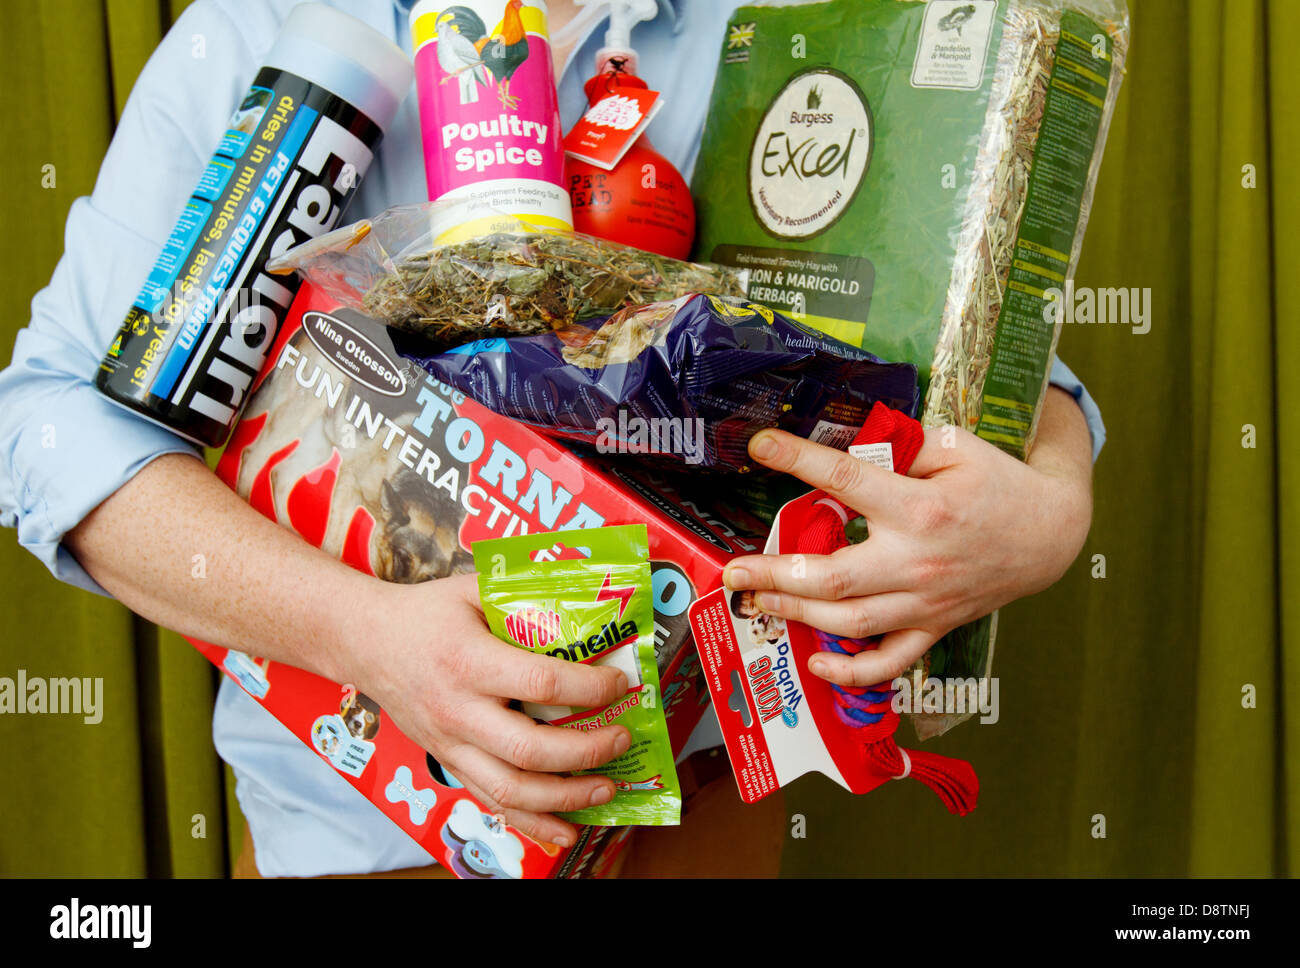 A man holds a large amount of pet related food, bedding and animal products Stock Photo